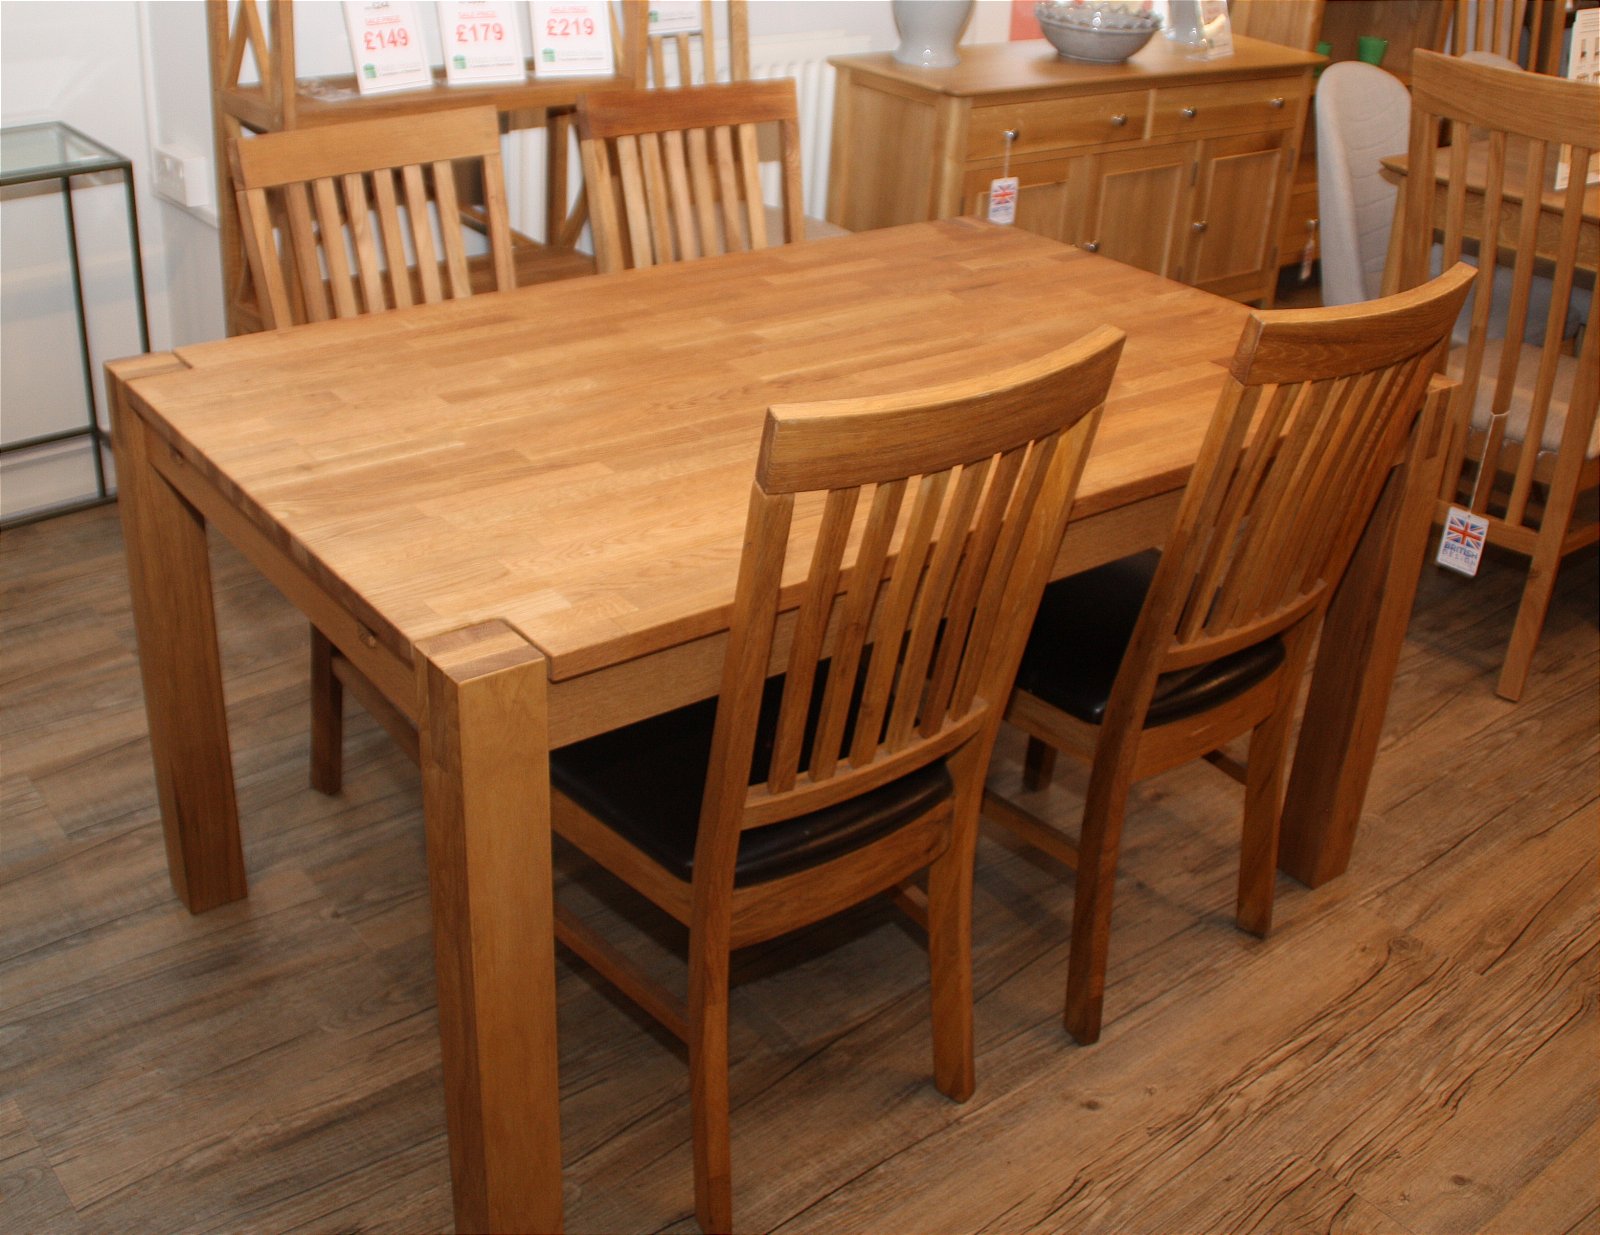 Oak Dining Room Table Chairs For Sale